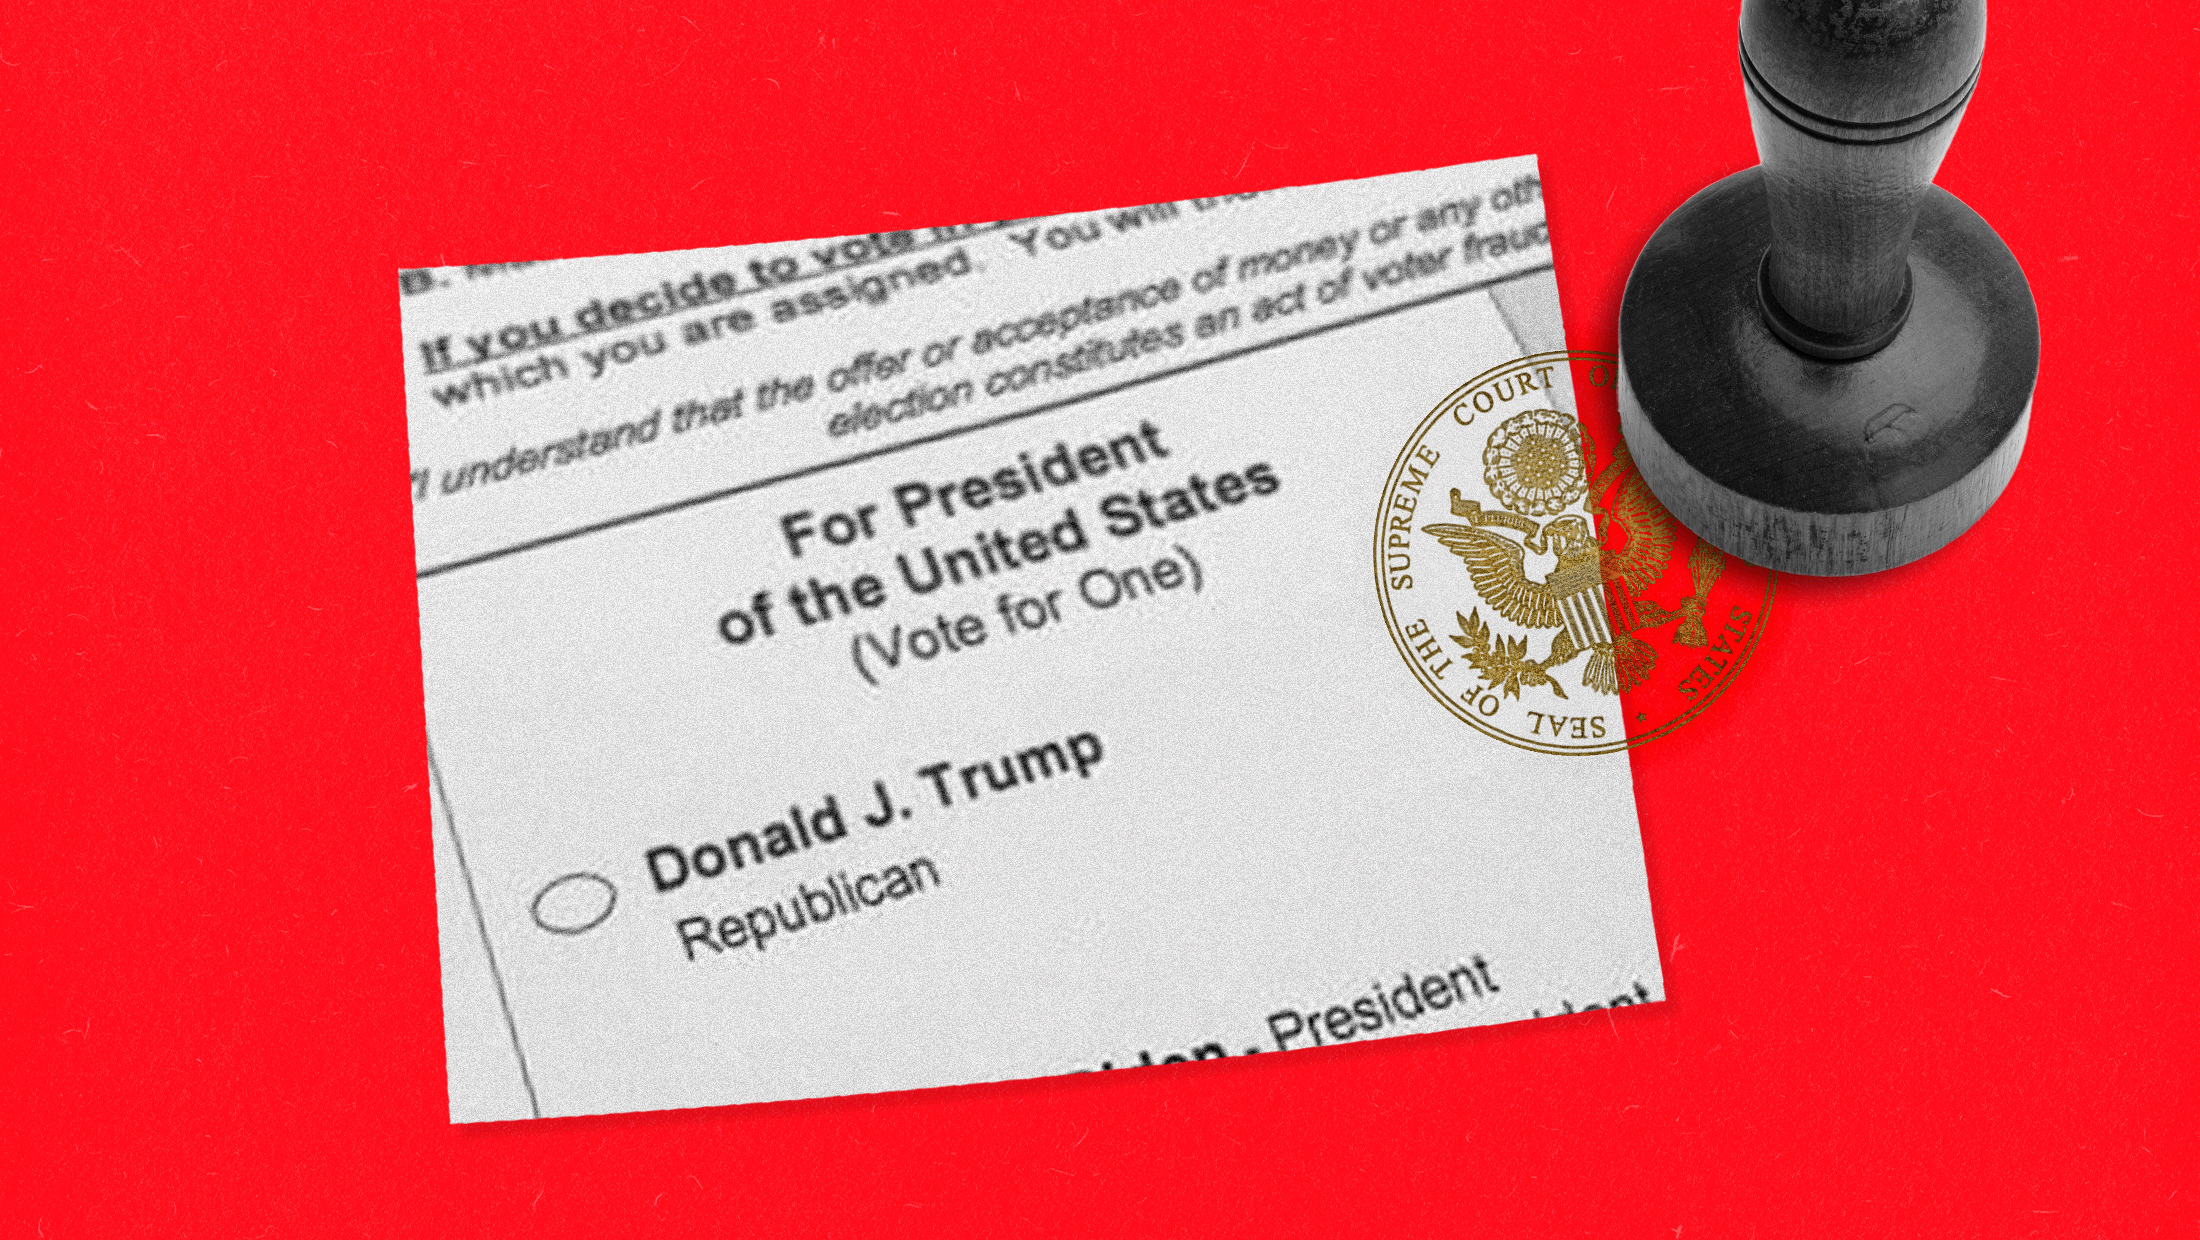 Red background with image of Donald J. Trump on the ballot and the U.S. Supreme Court's seal stamped on the ballot.